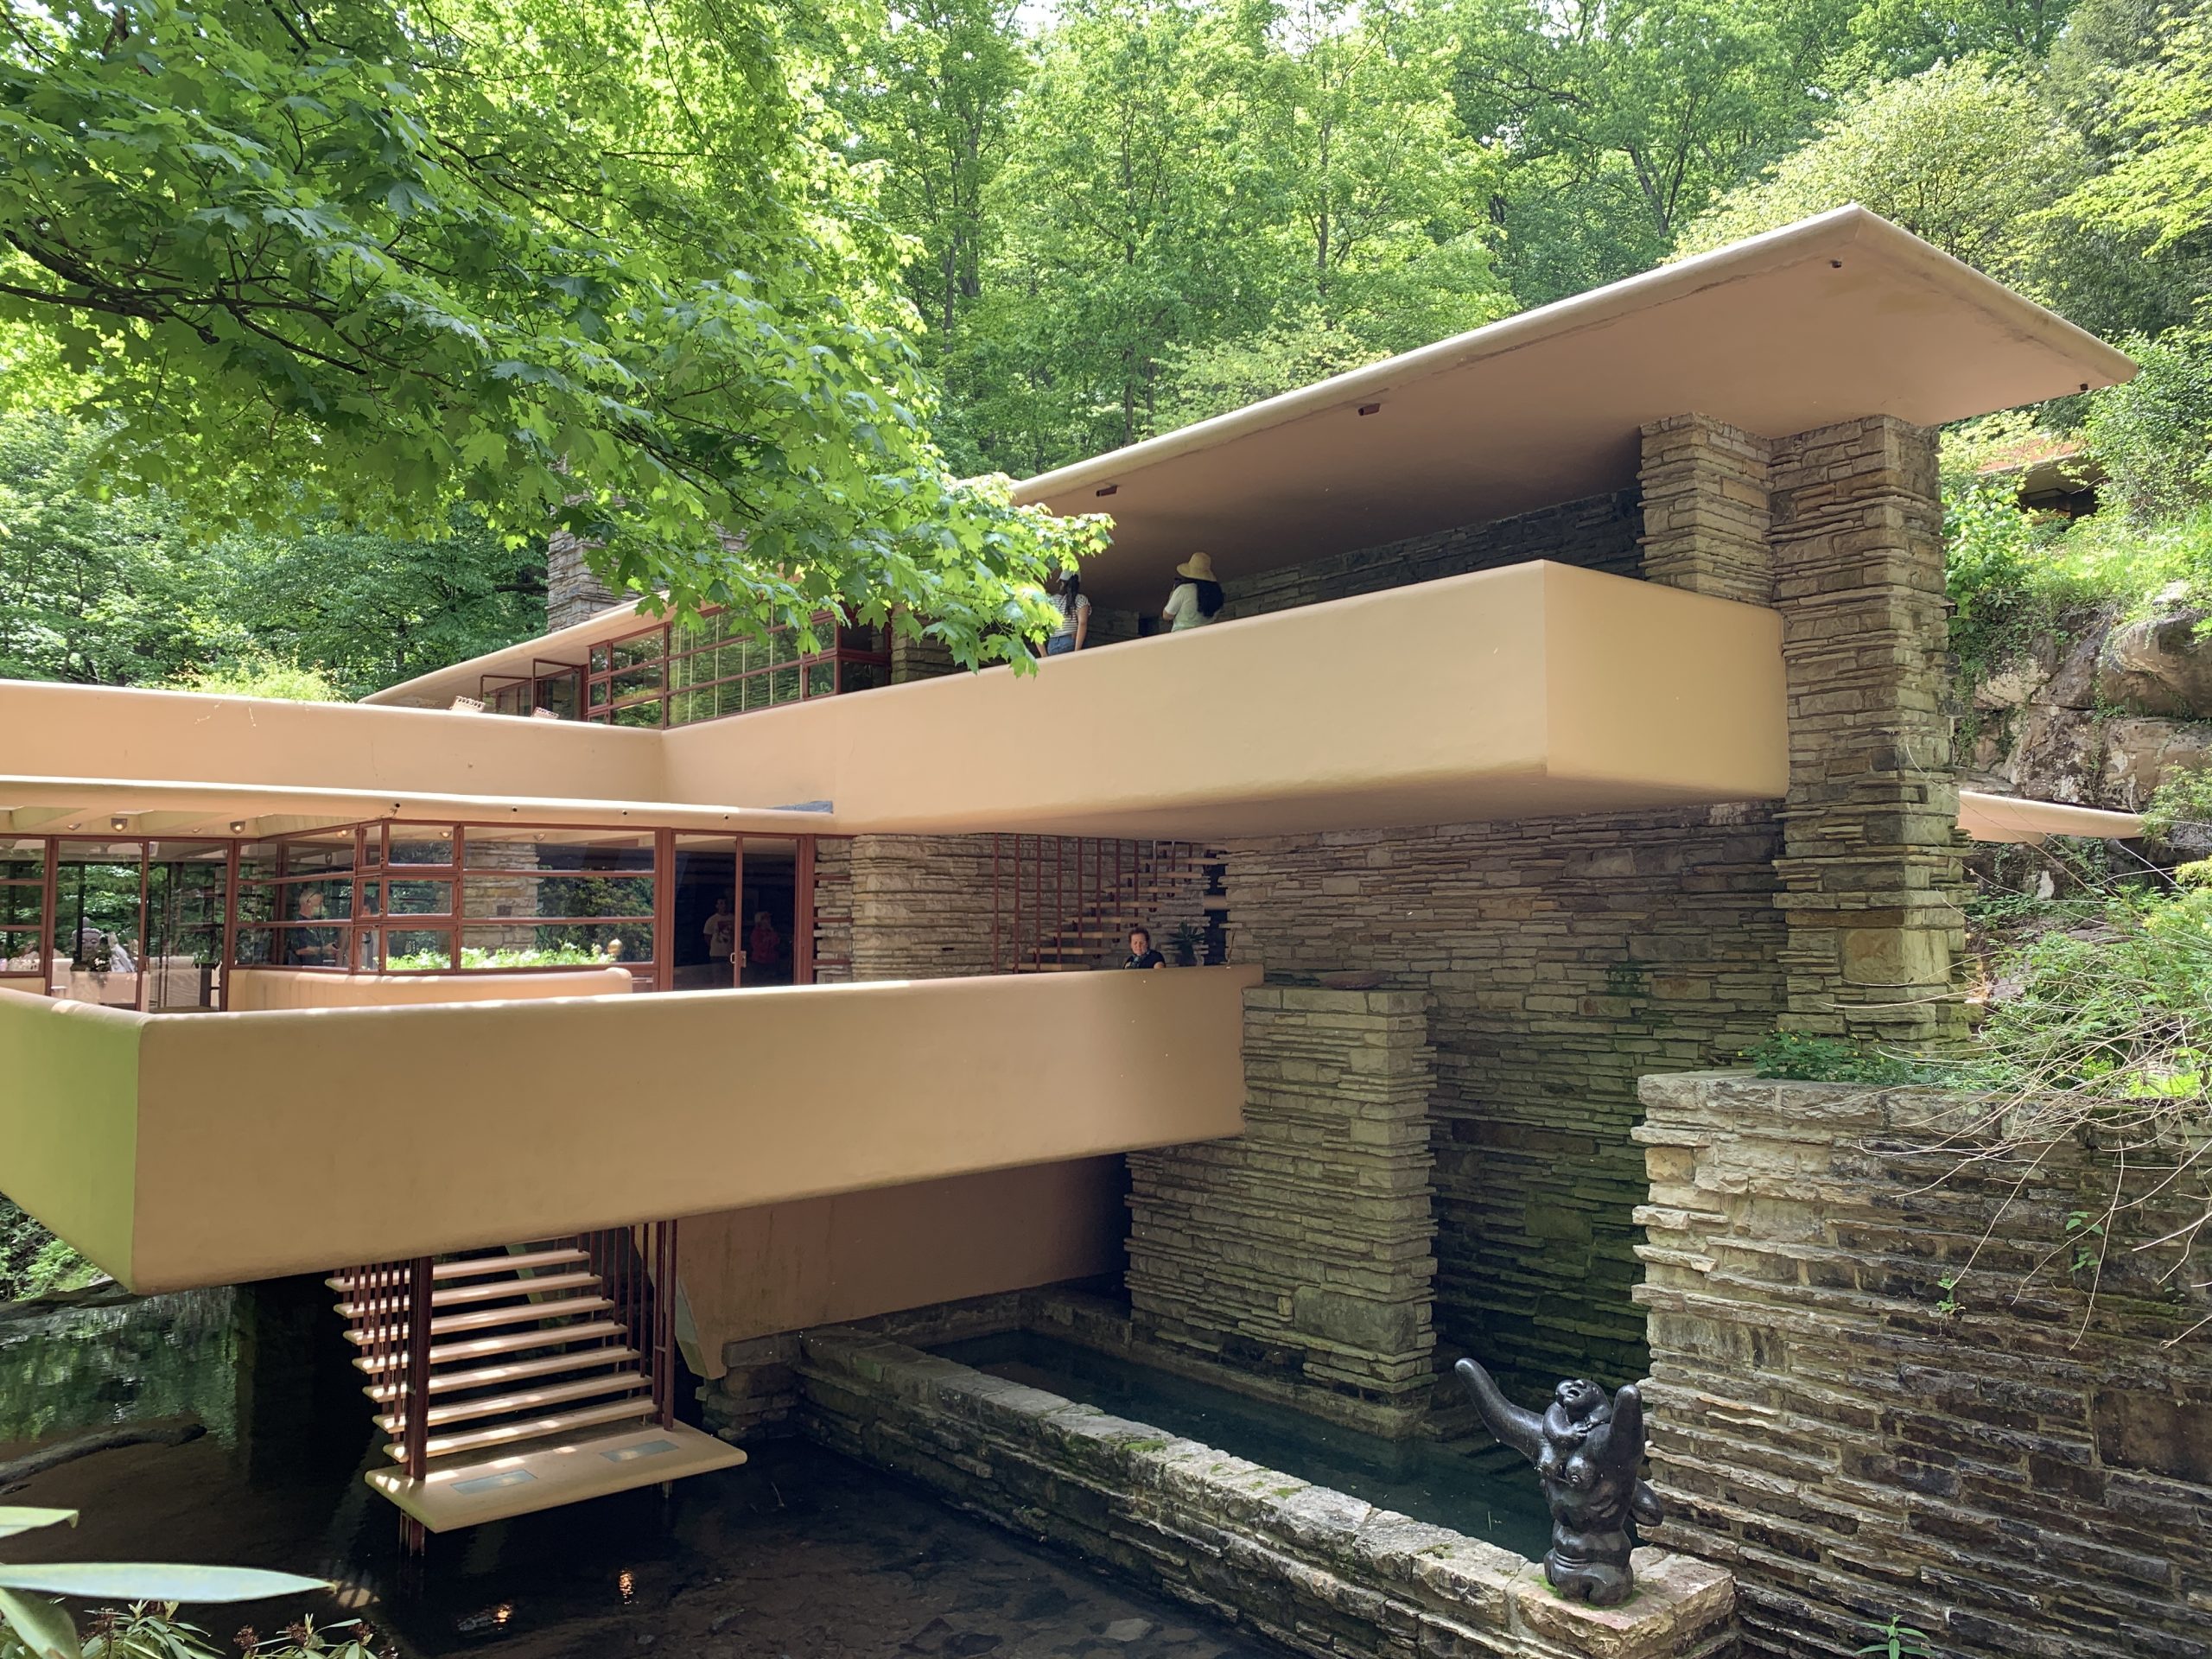 First sight of Fallingwaters, Frank Lloyd Wright house in Laurel Highlands, Pennsylvania